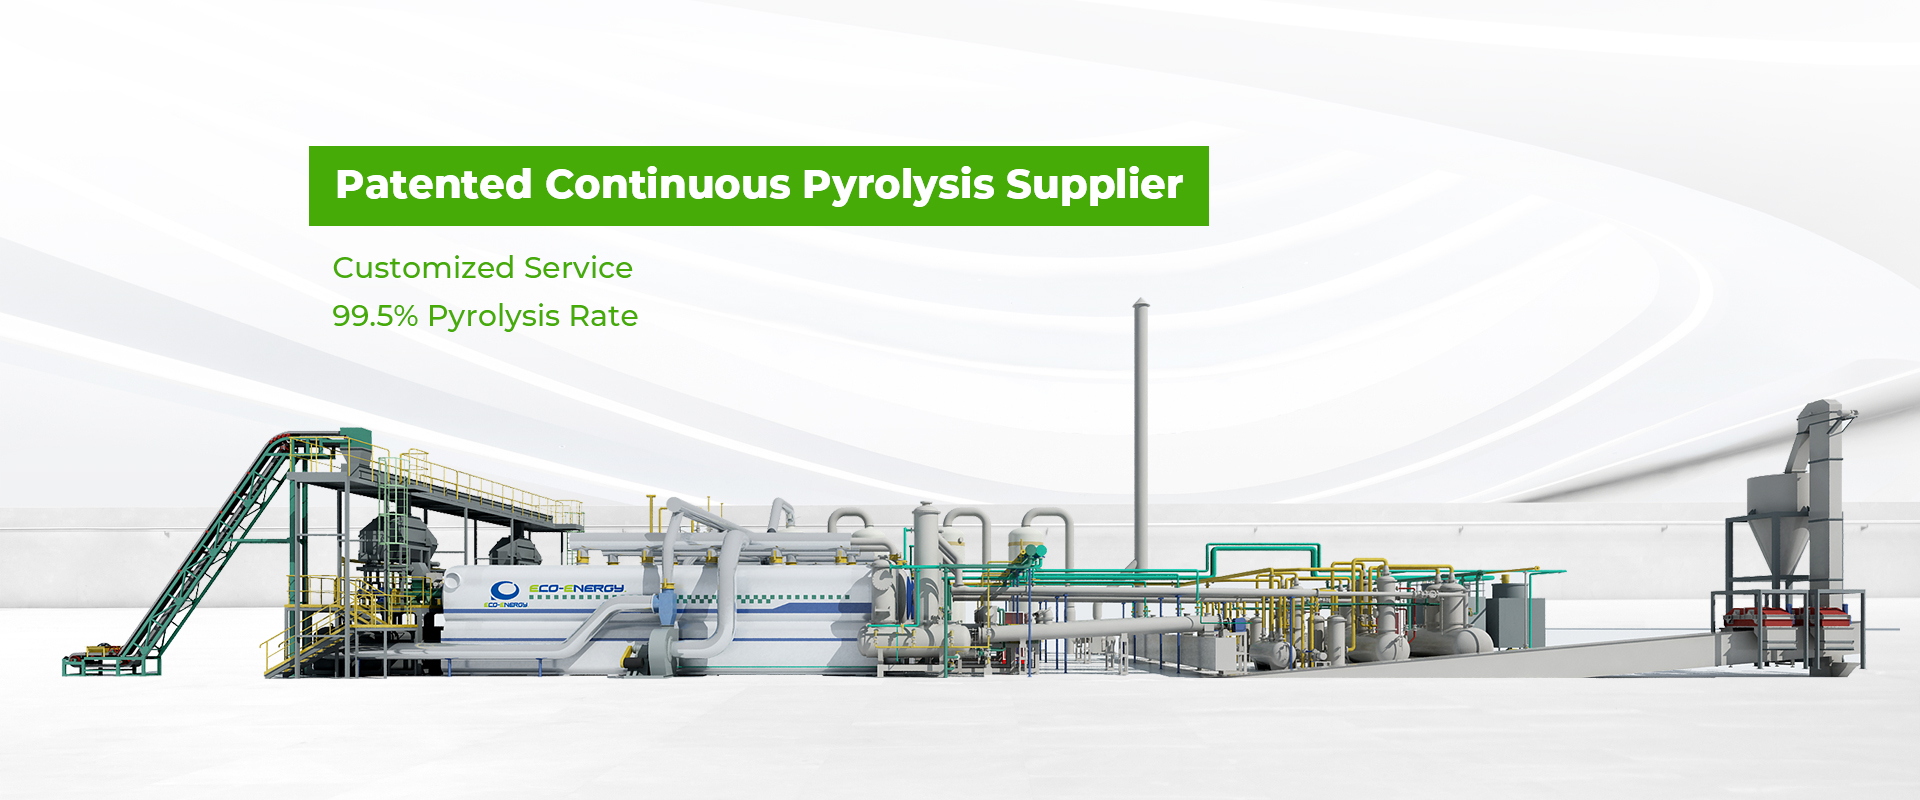 Fully Continuous Pyrolysis Supplier